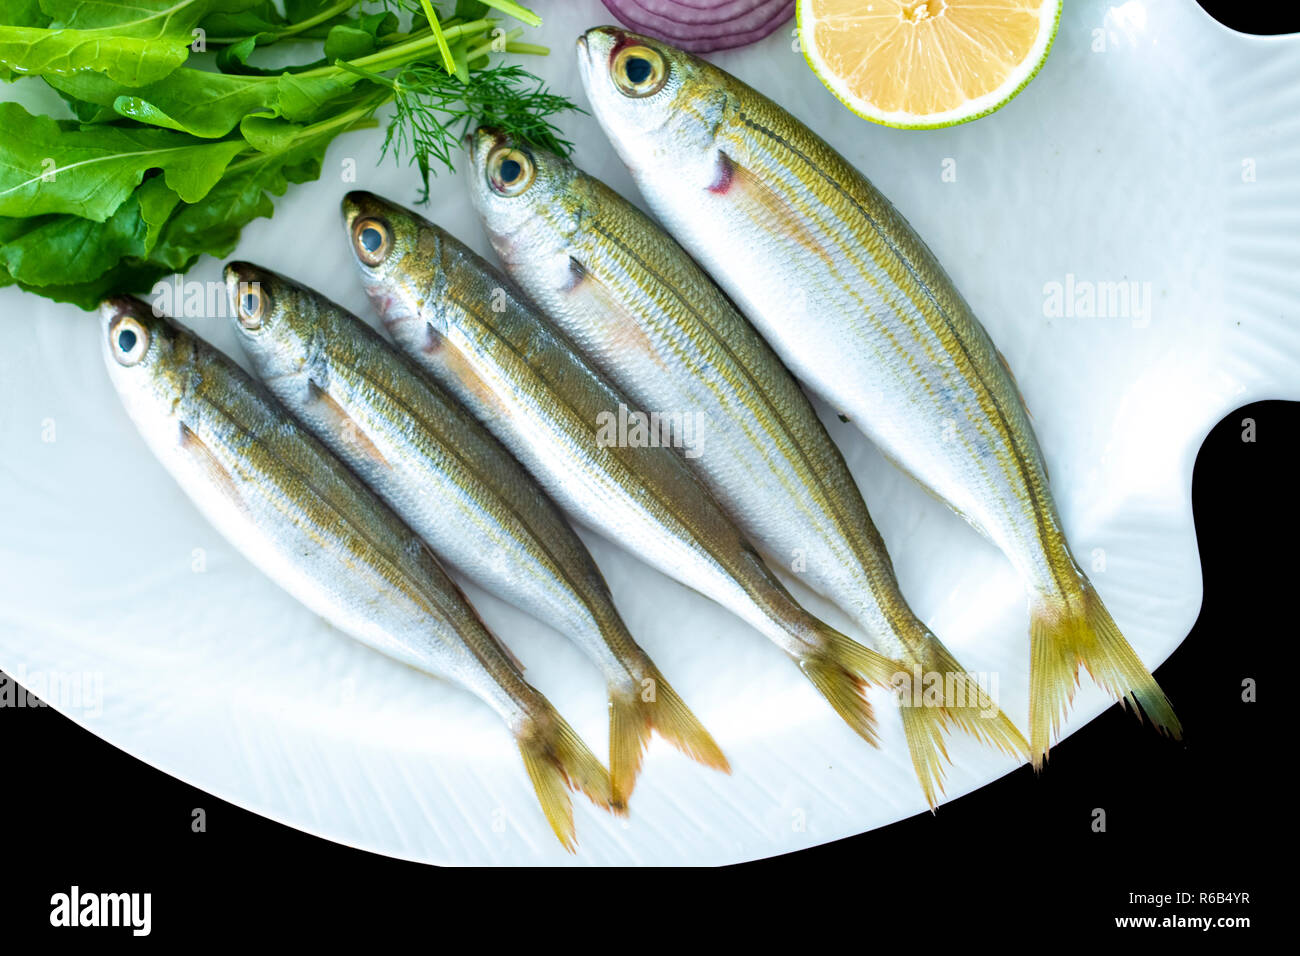 Bogue fish also known as Boops boops with rockets leaves served on white plate with black background Stock Photo